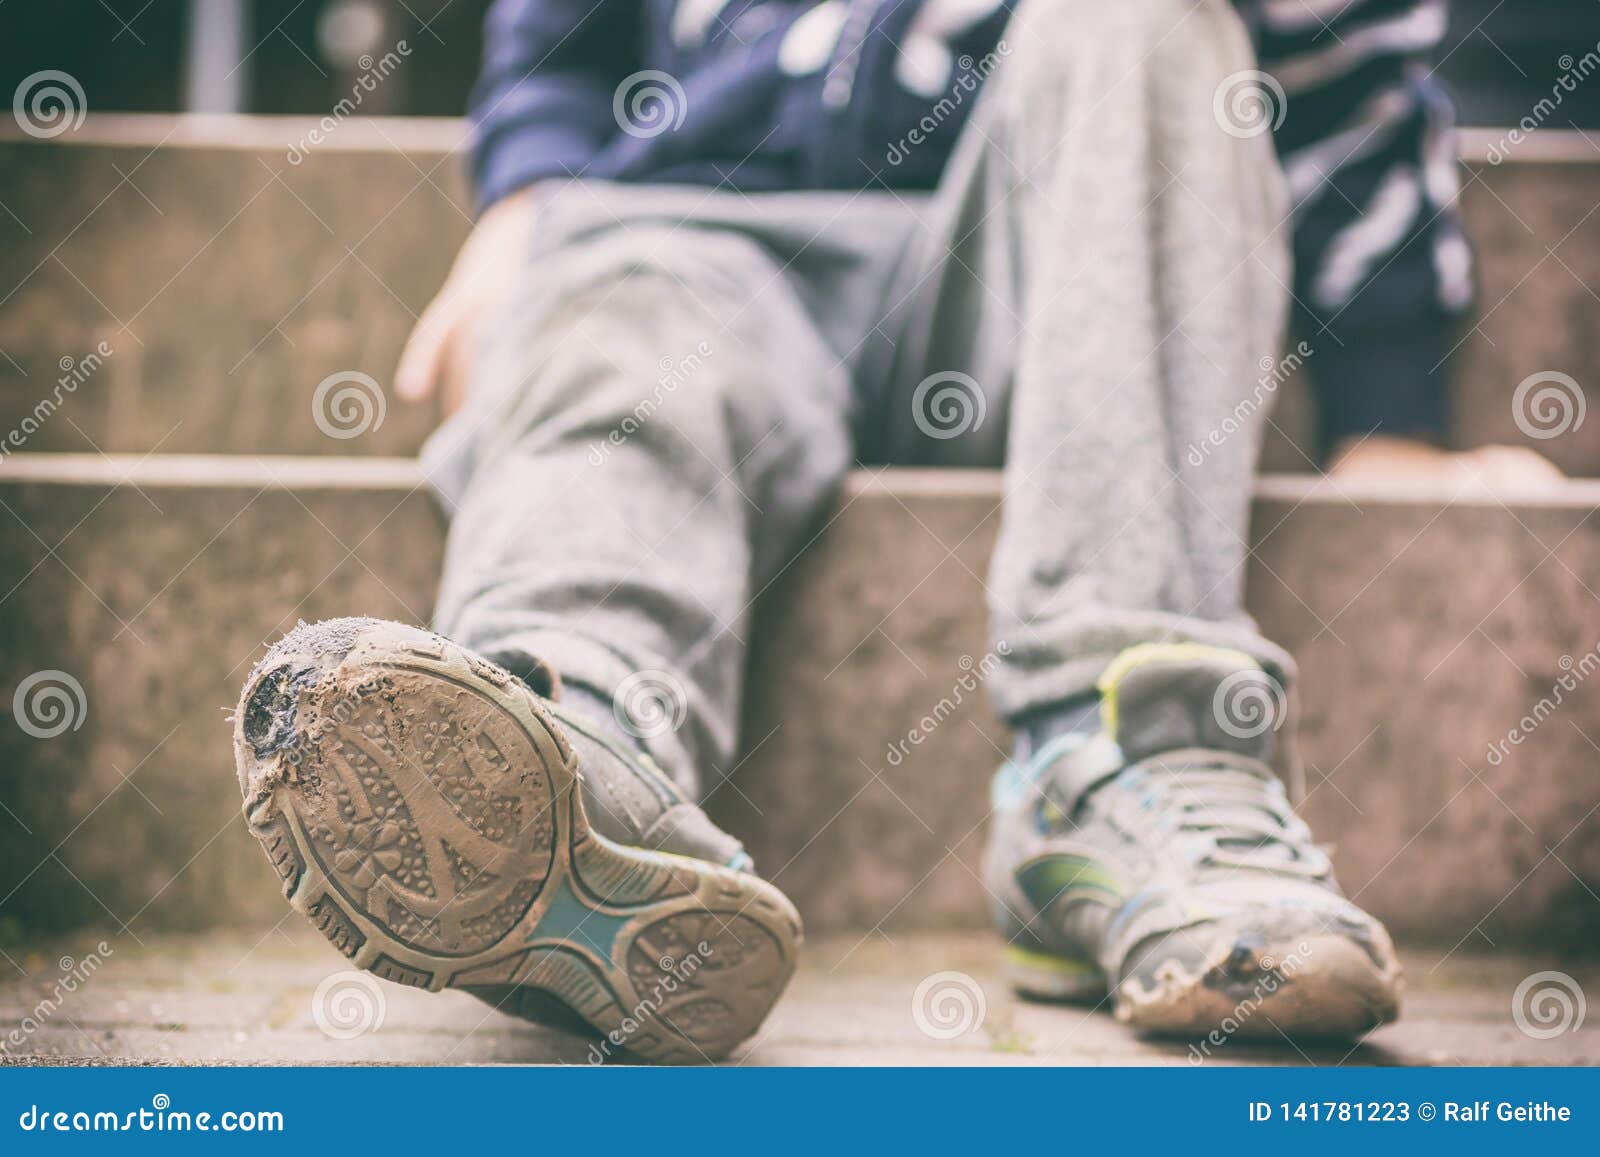 old broken shoes of a little boy as a  for child poverty